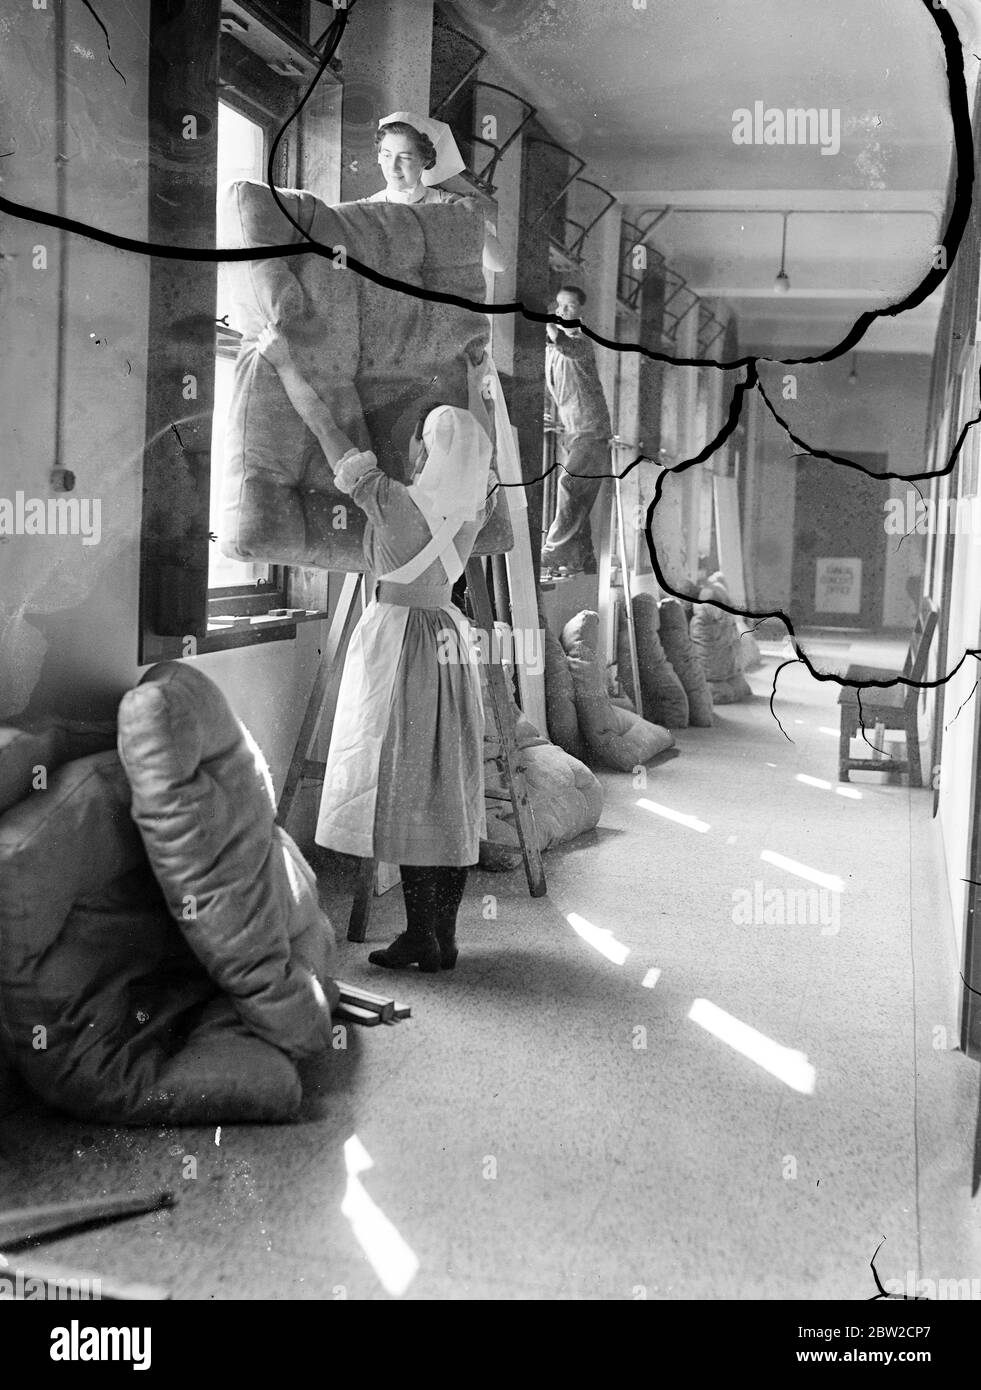 Precautions which will enable the essential work of the hospital to continue despite the danger of air raids in wartime are being taken at the Middlesex Hospital, London. Nurses use mattresses to block up windows. 29 August 1939 Stock Photo